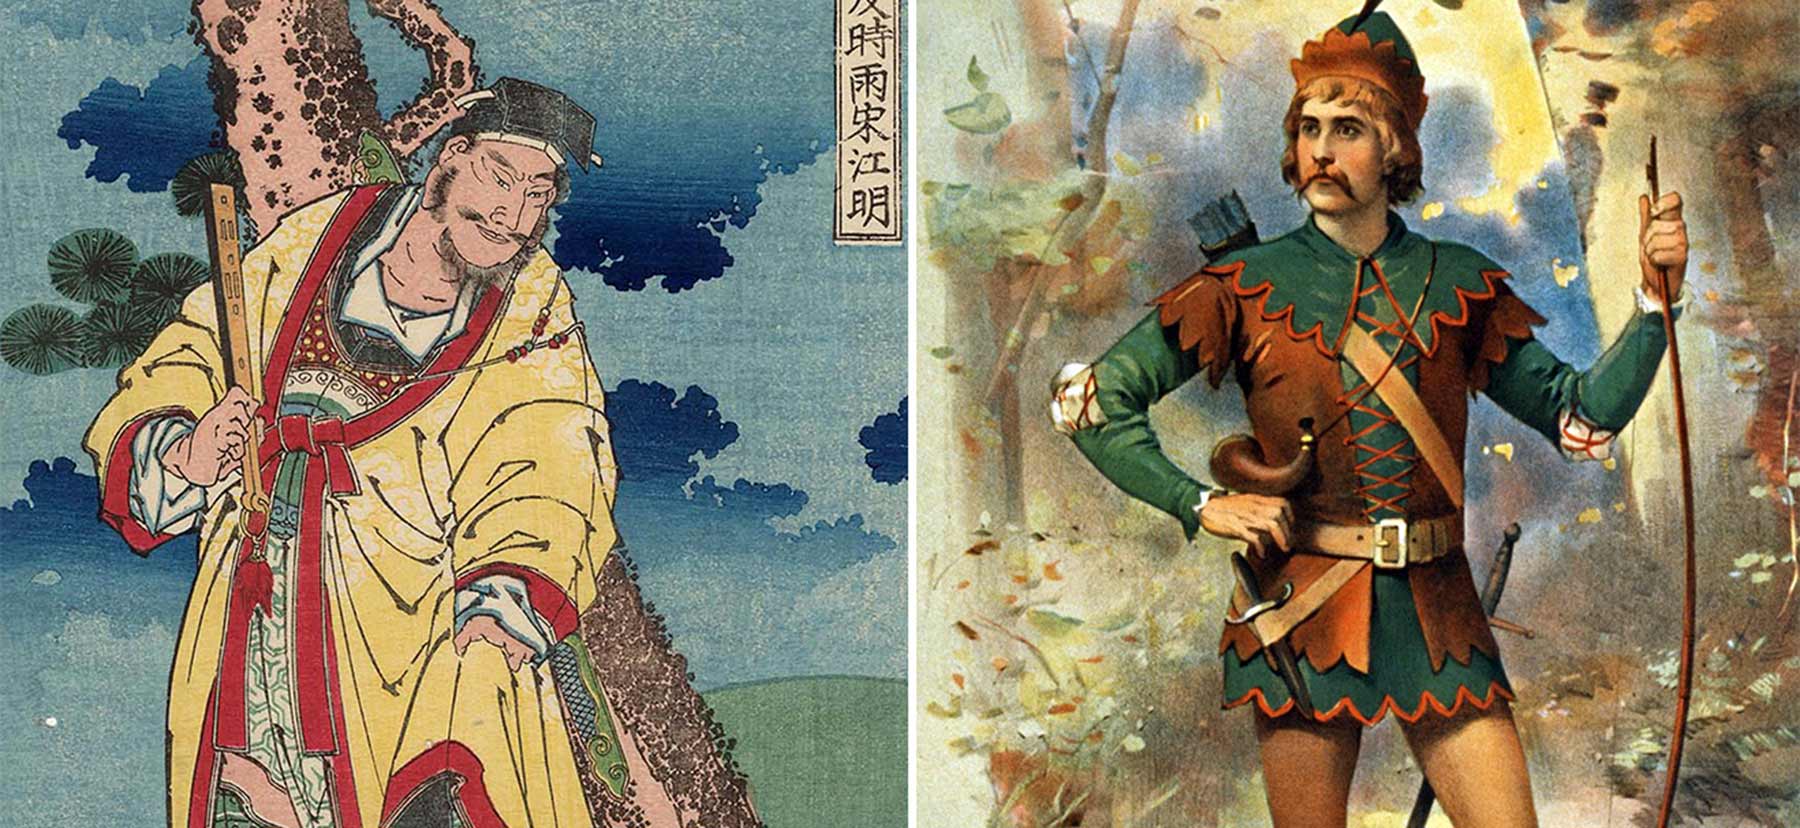 Illustration of Song Jiangming and a poster featuring Robin Hood